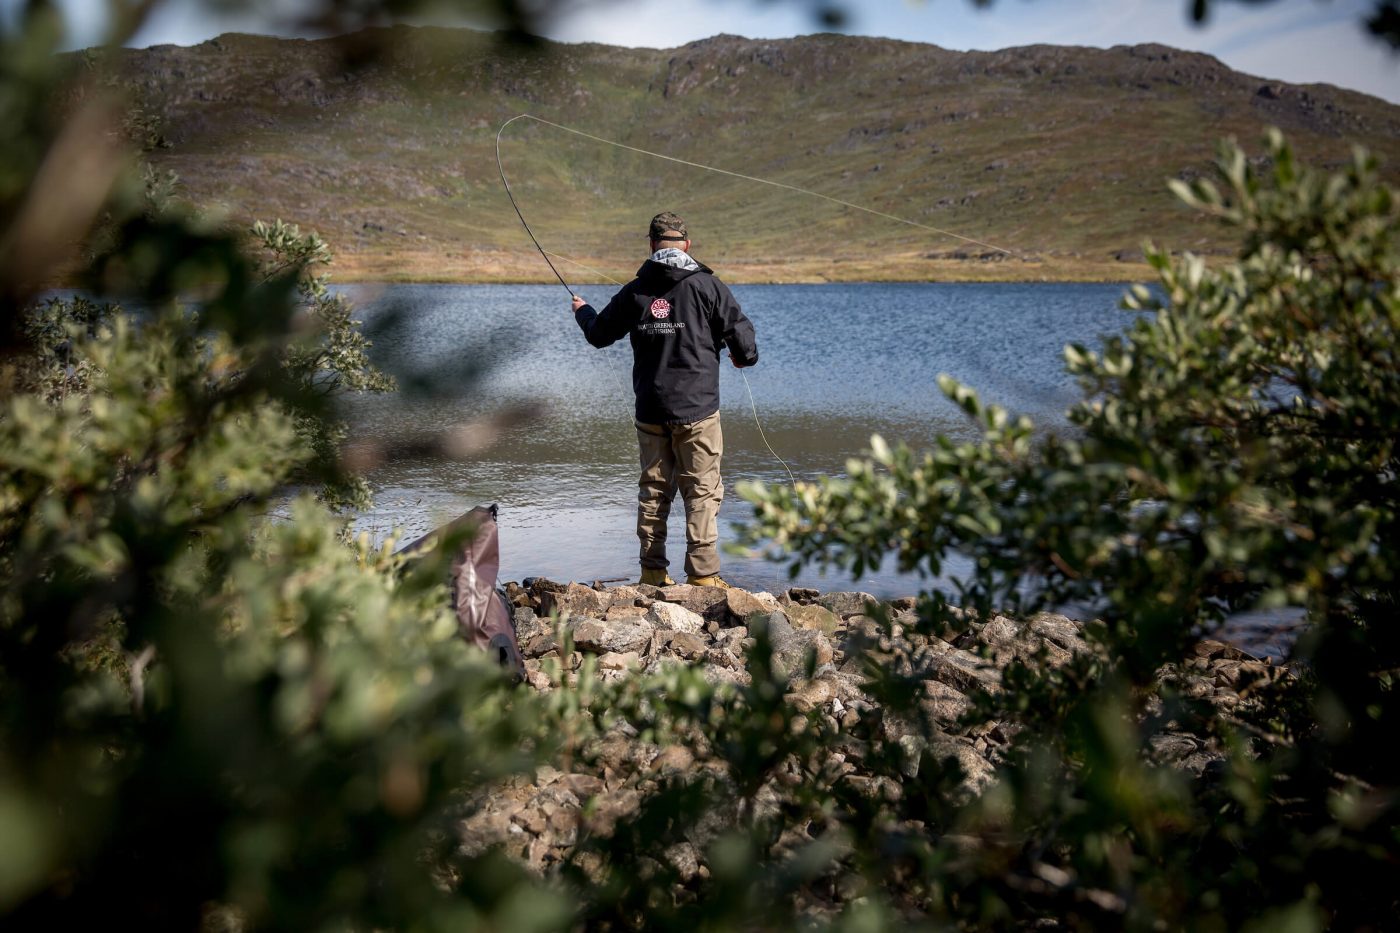 Fly fishing for arctic charr with the guide from South Greenland Fly Fishing. By Mads Pihl